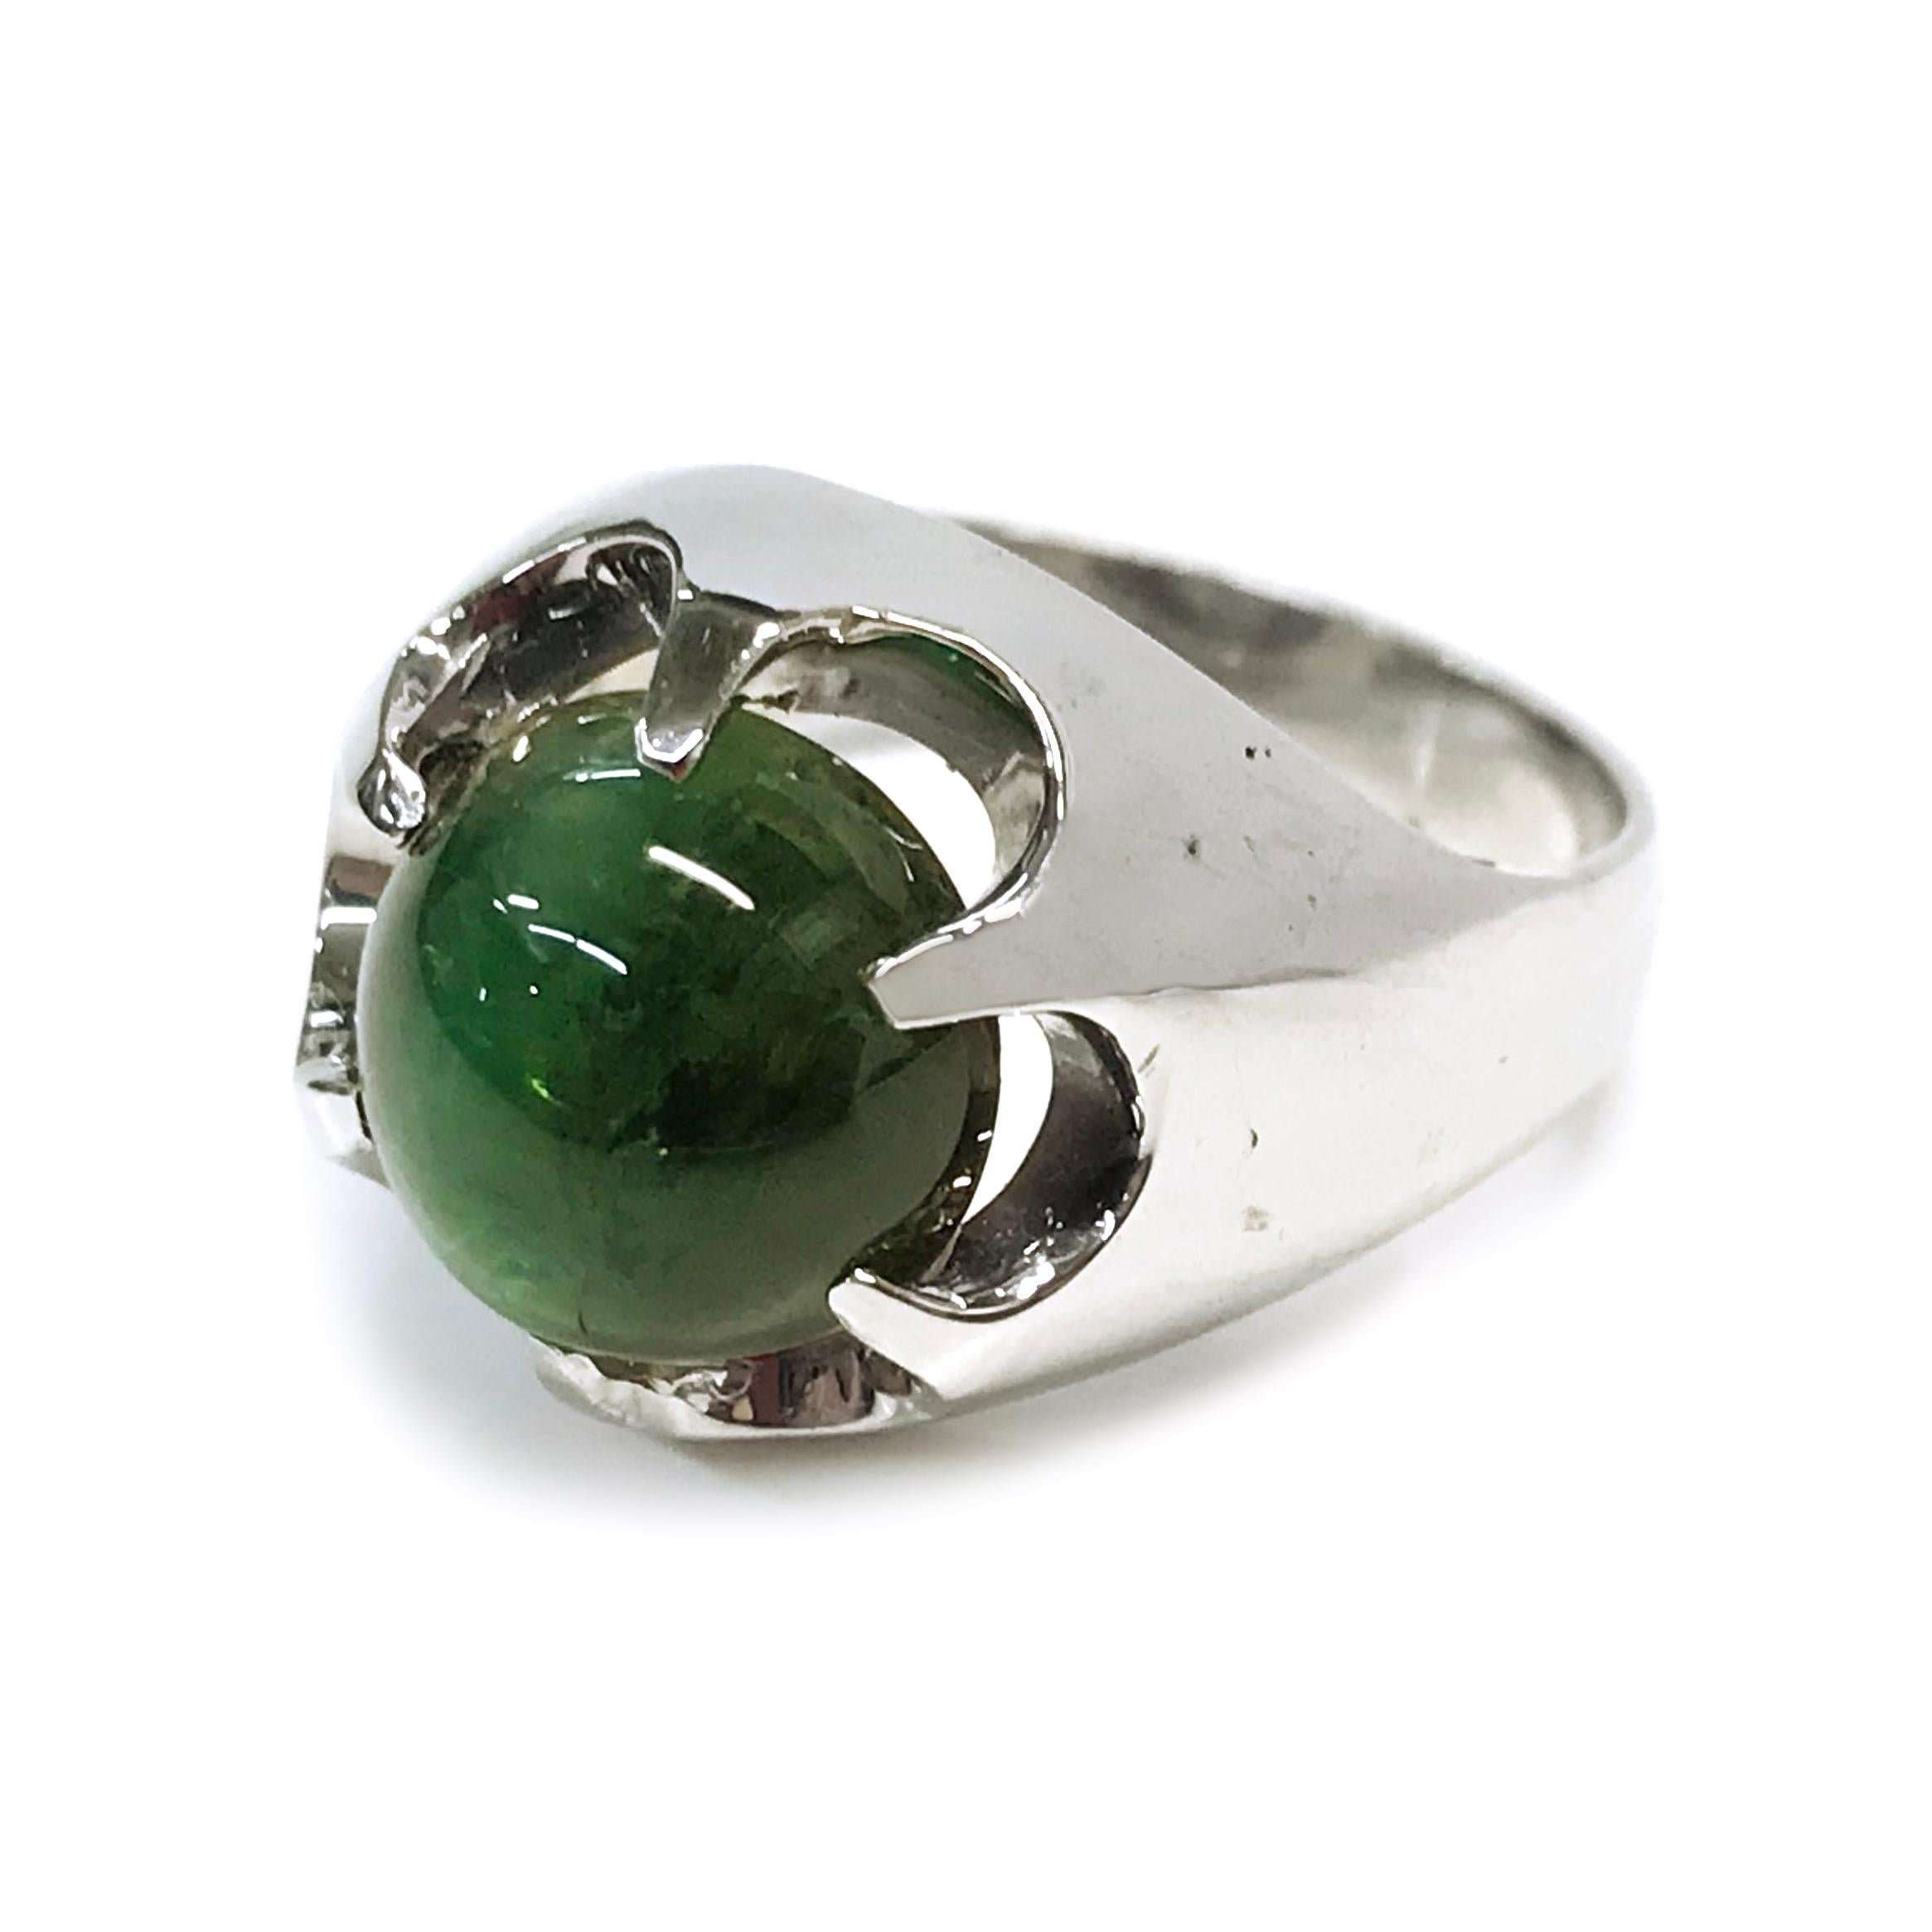 14 Karat White Gold Green Cat's Eye Tourmaline Cocktail Ring. The green Tourmaline cabochon measures 11.3mm and has an approximate weight of 14.0ct. The beautiful green hue set against 14k white gold creates a striking contrast. There is a prominent